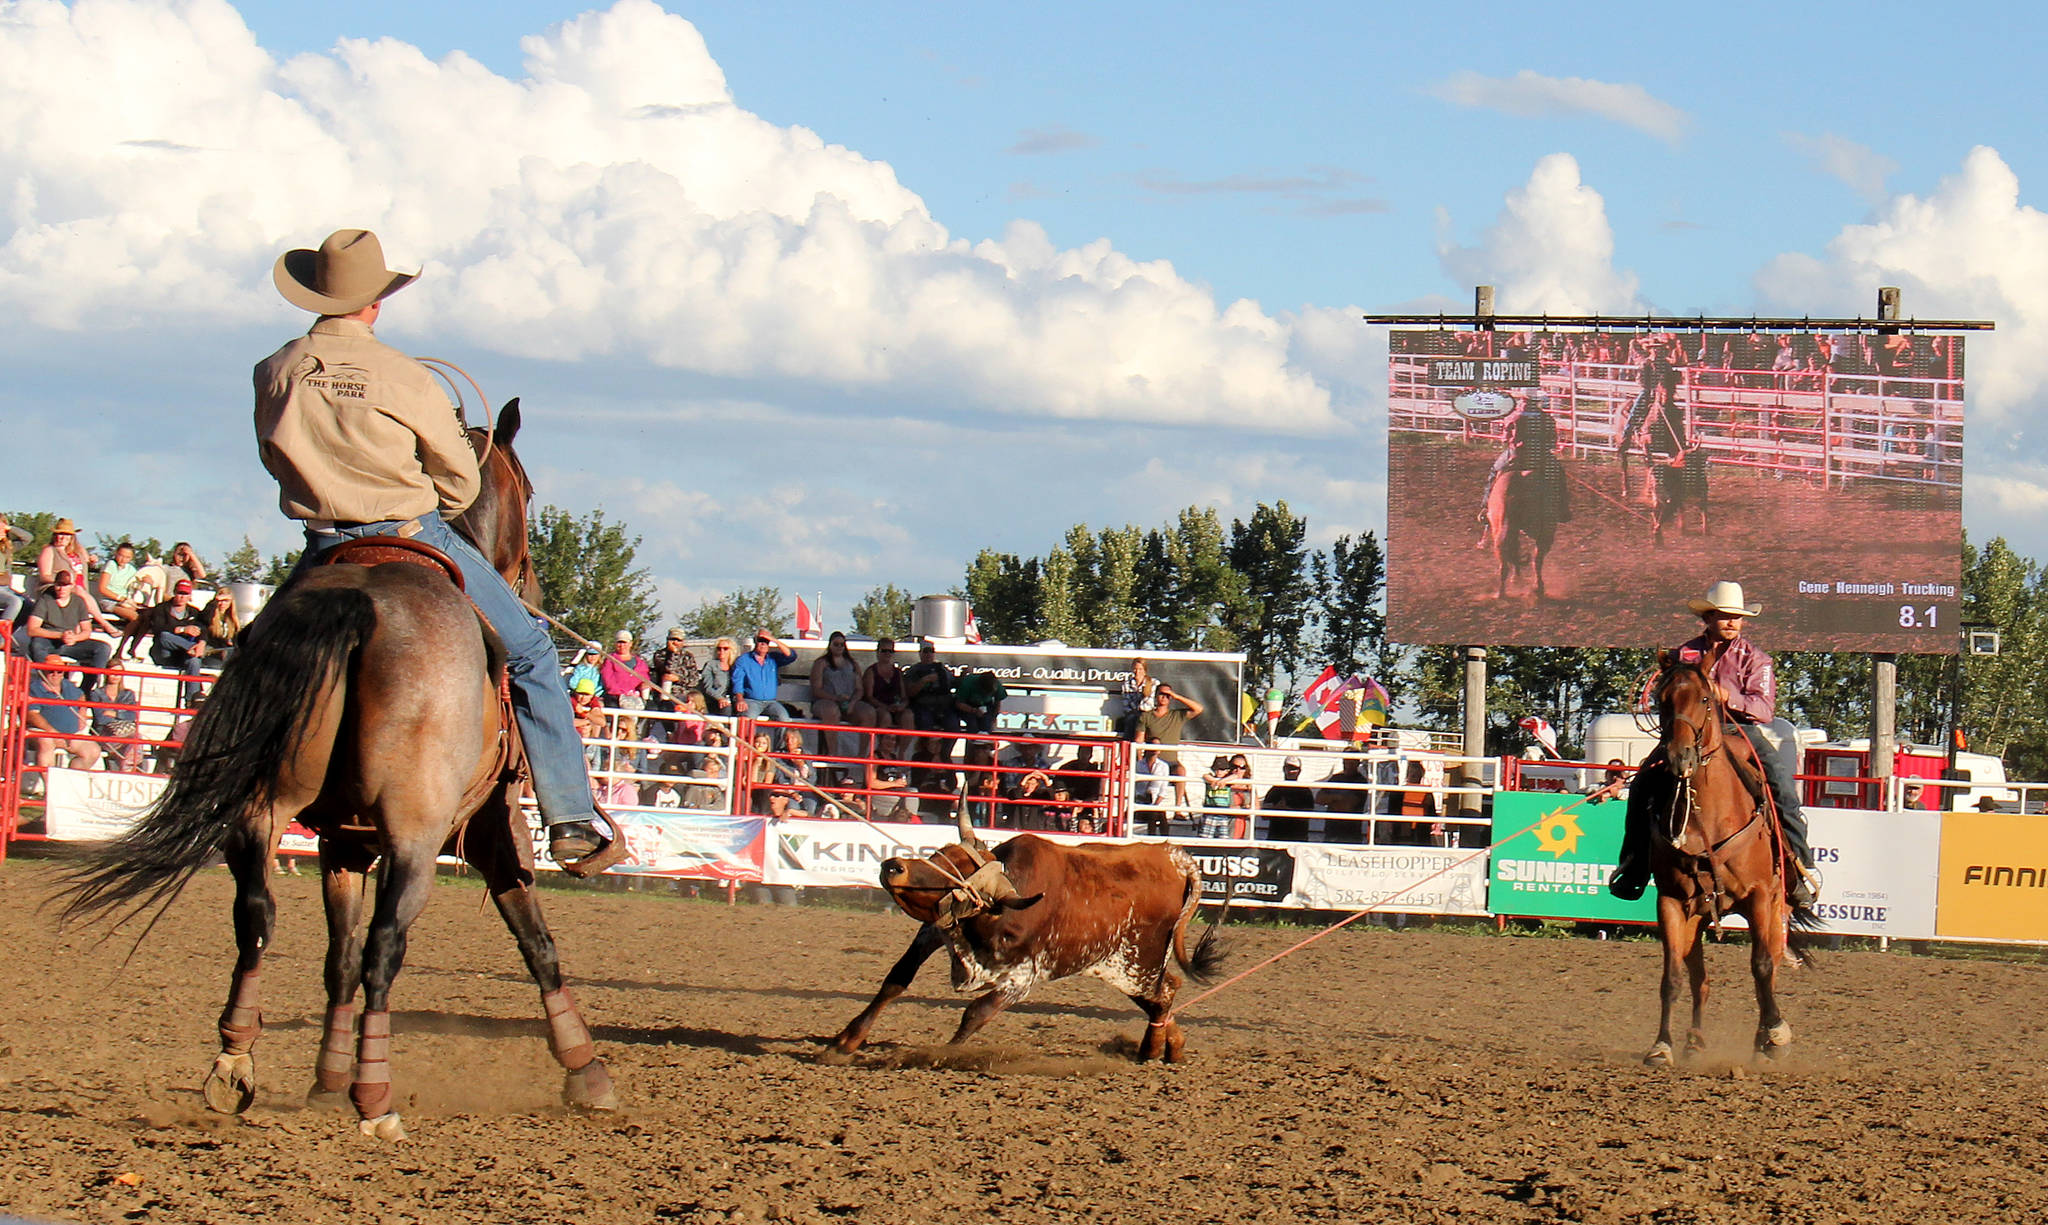 The roping team of Elliott and Denny worked together quickly to get the job done during the team roping event.